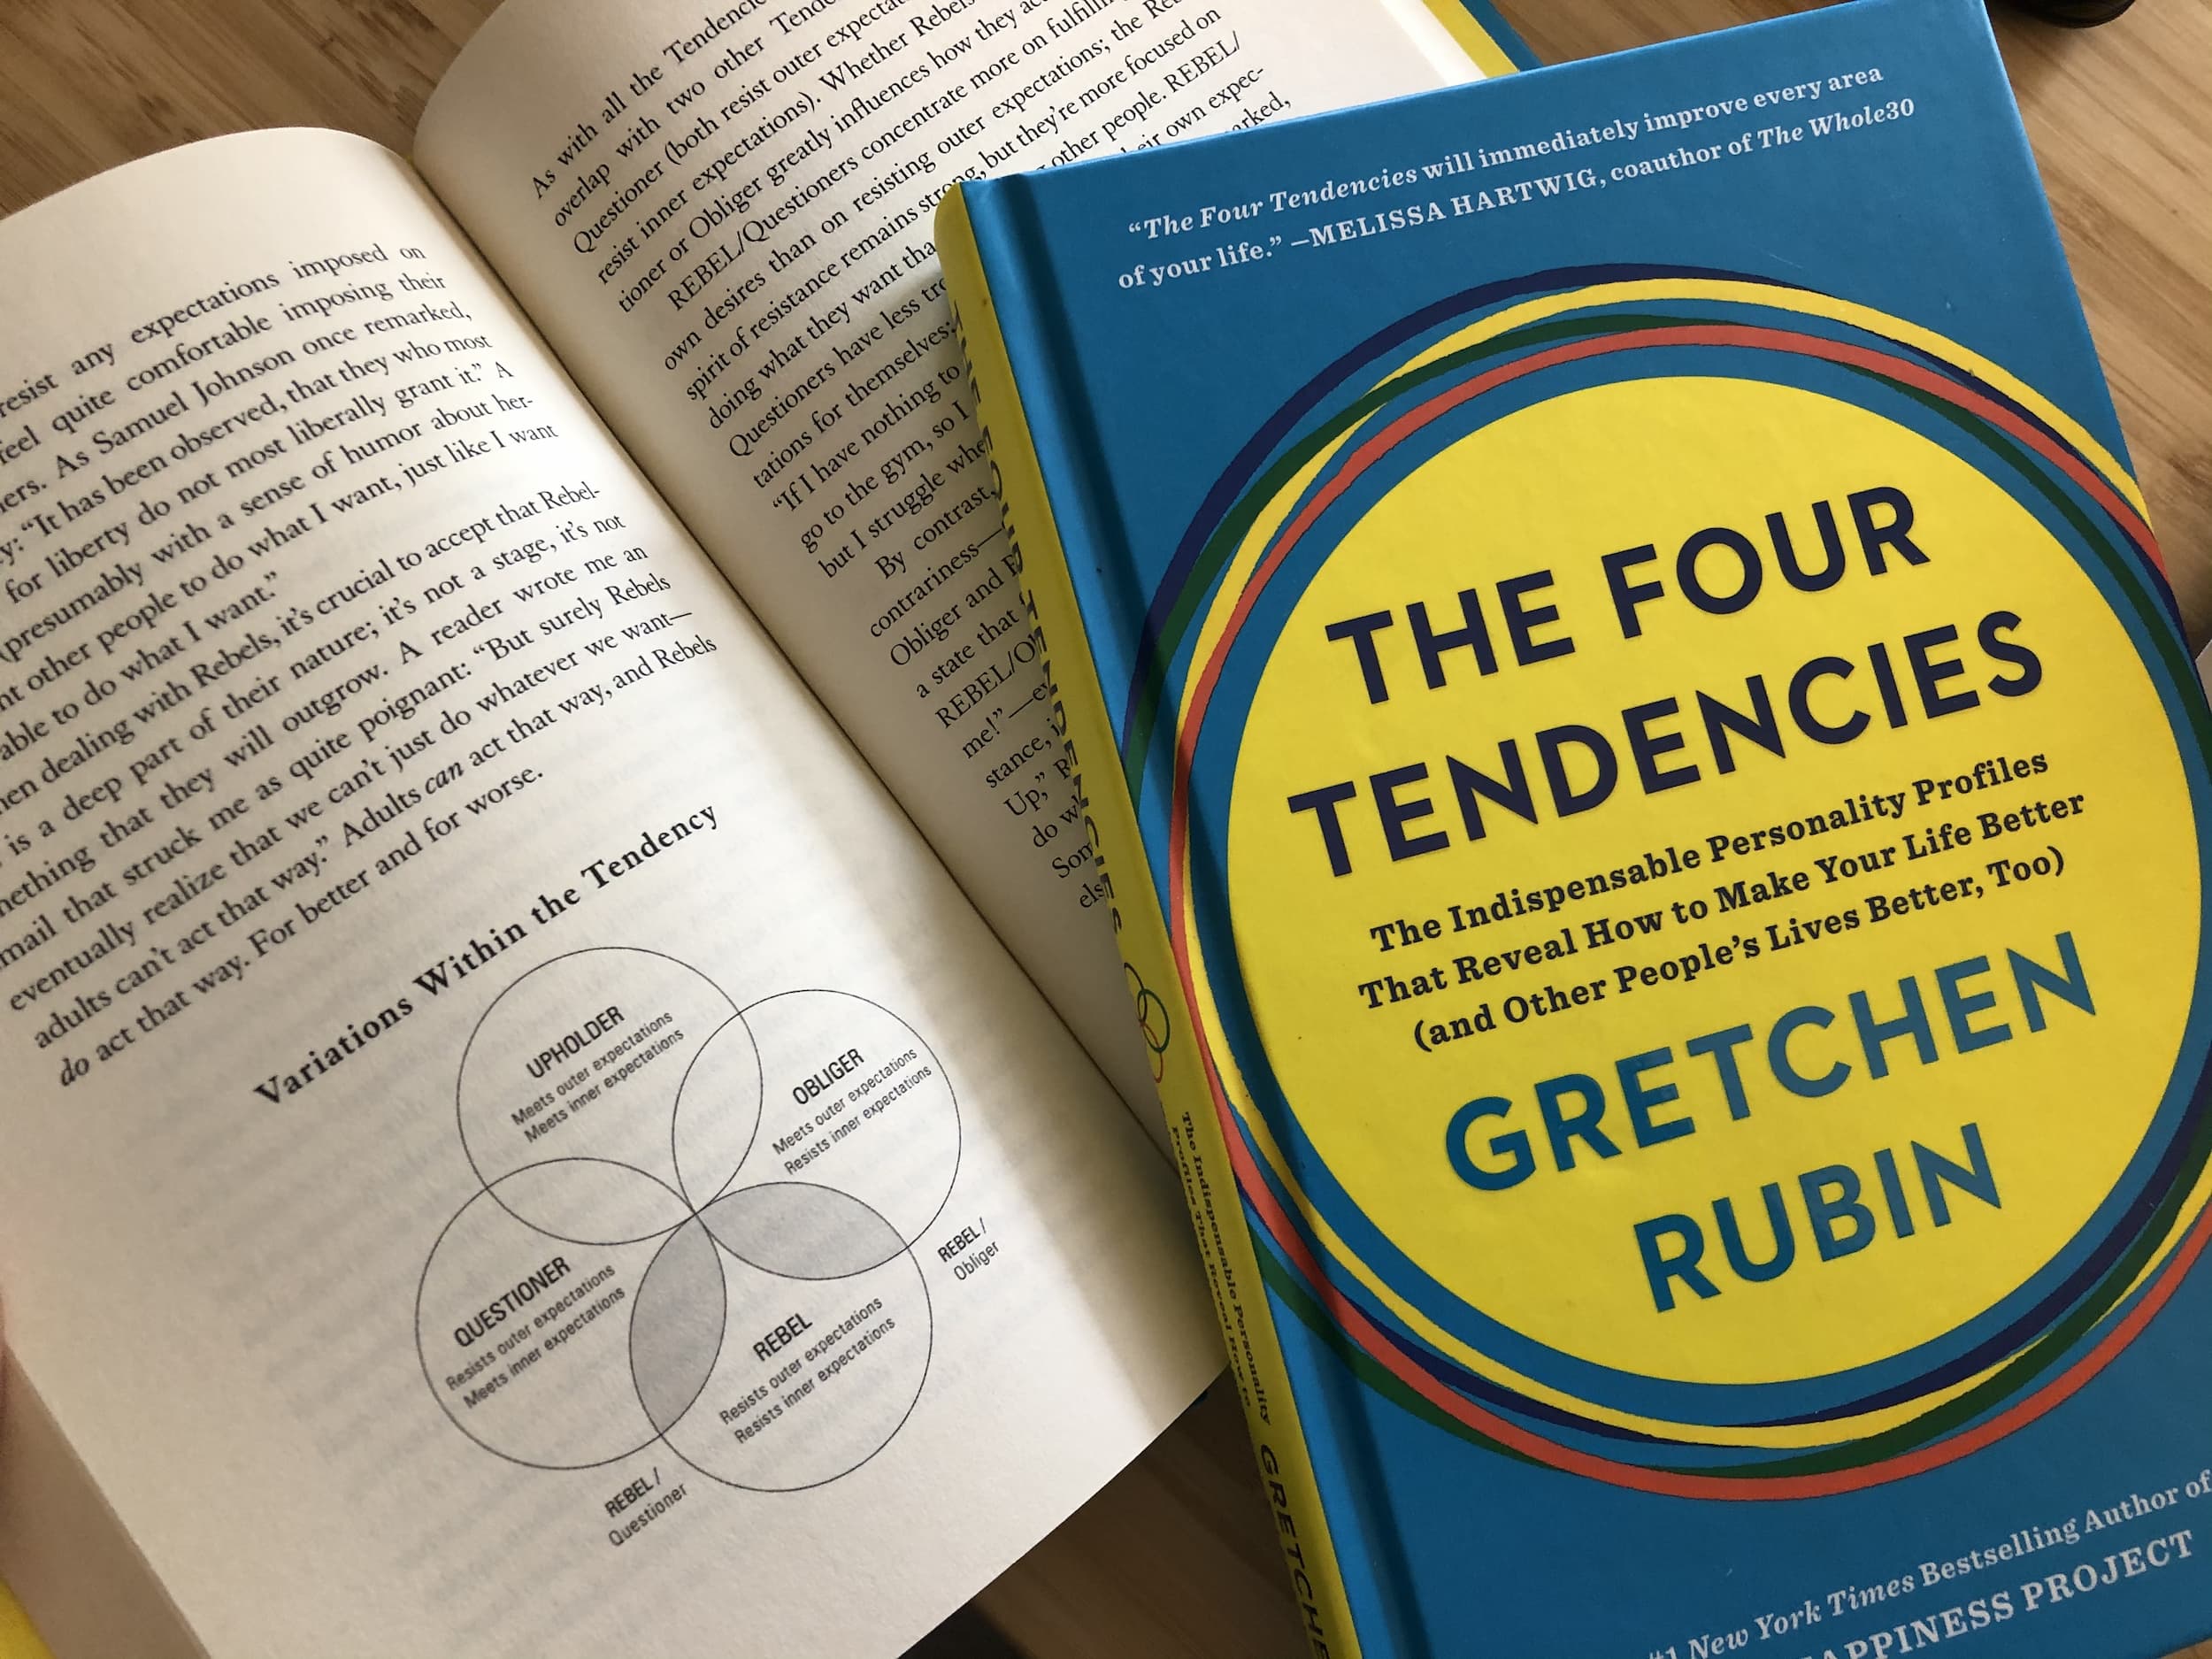 The four tendencies book